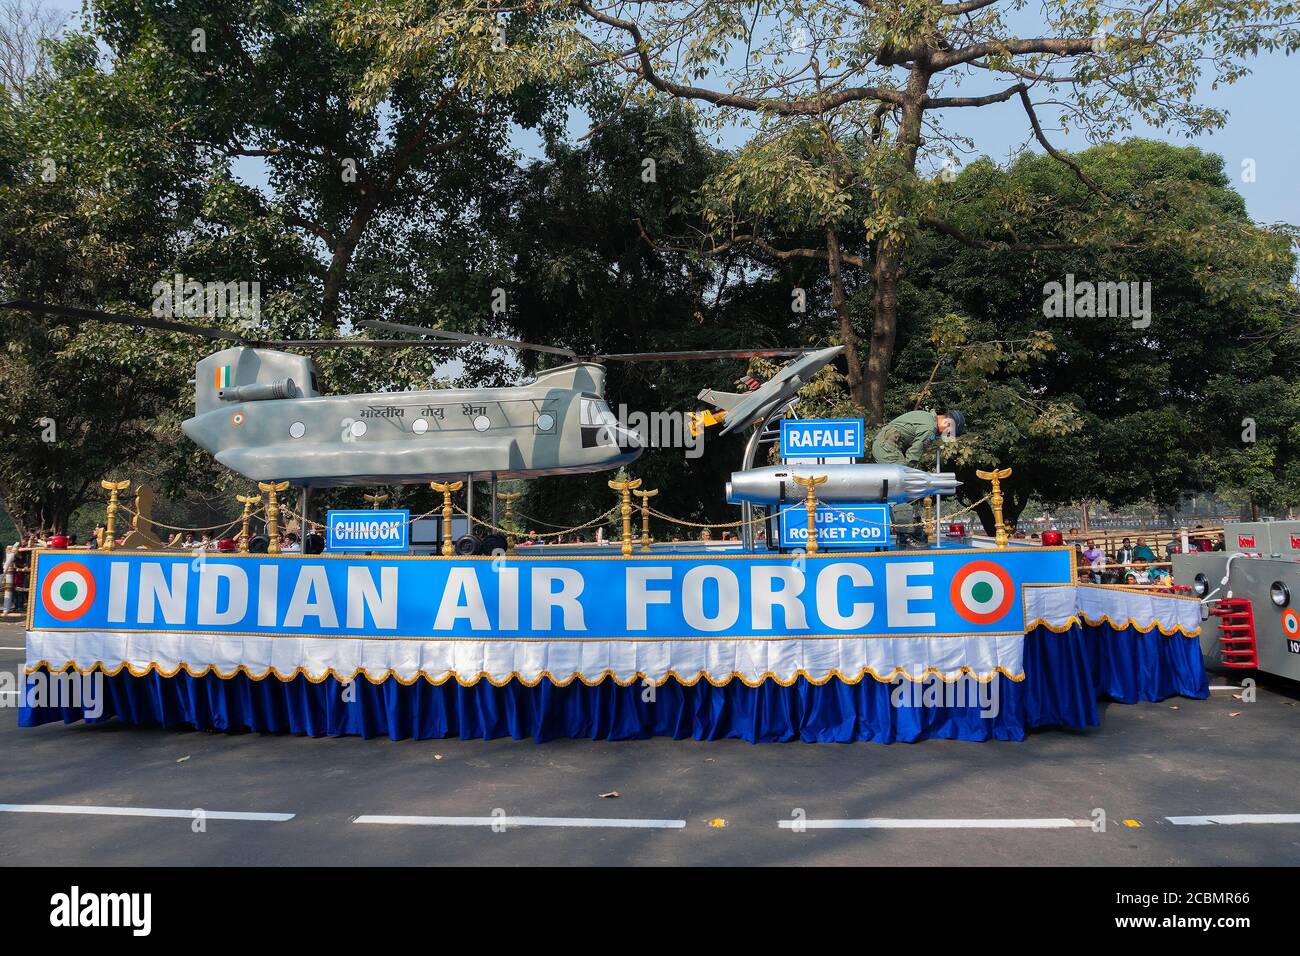 Kolkata, West Bengal, India - 26th January 2020 : A truck carrying model of Rafale fighter jet, UB 16 rocket pod and Chinook helicopter, Republic day. Stock Photo